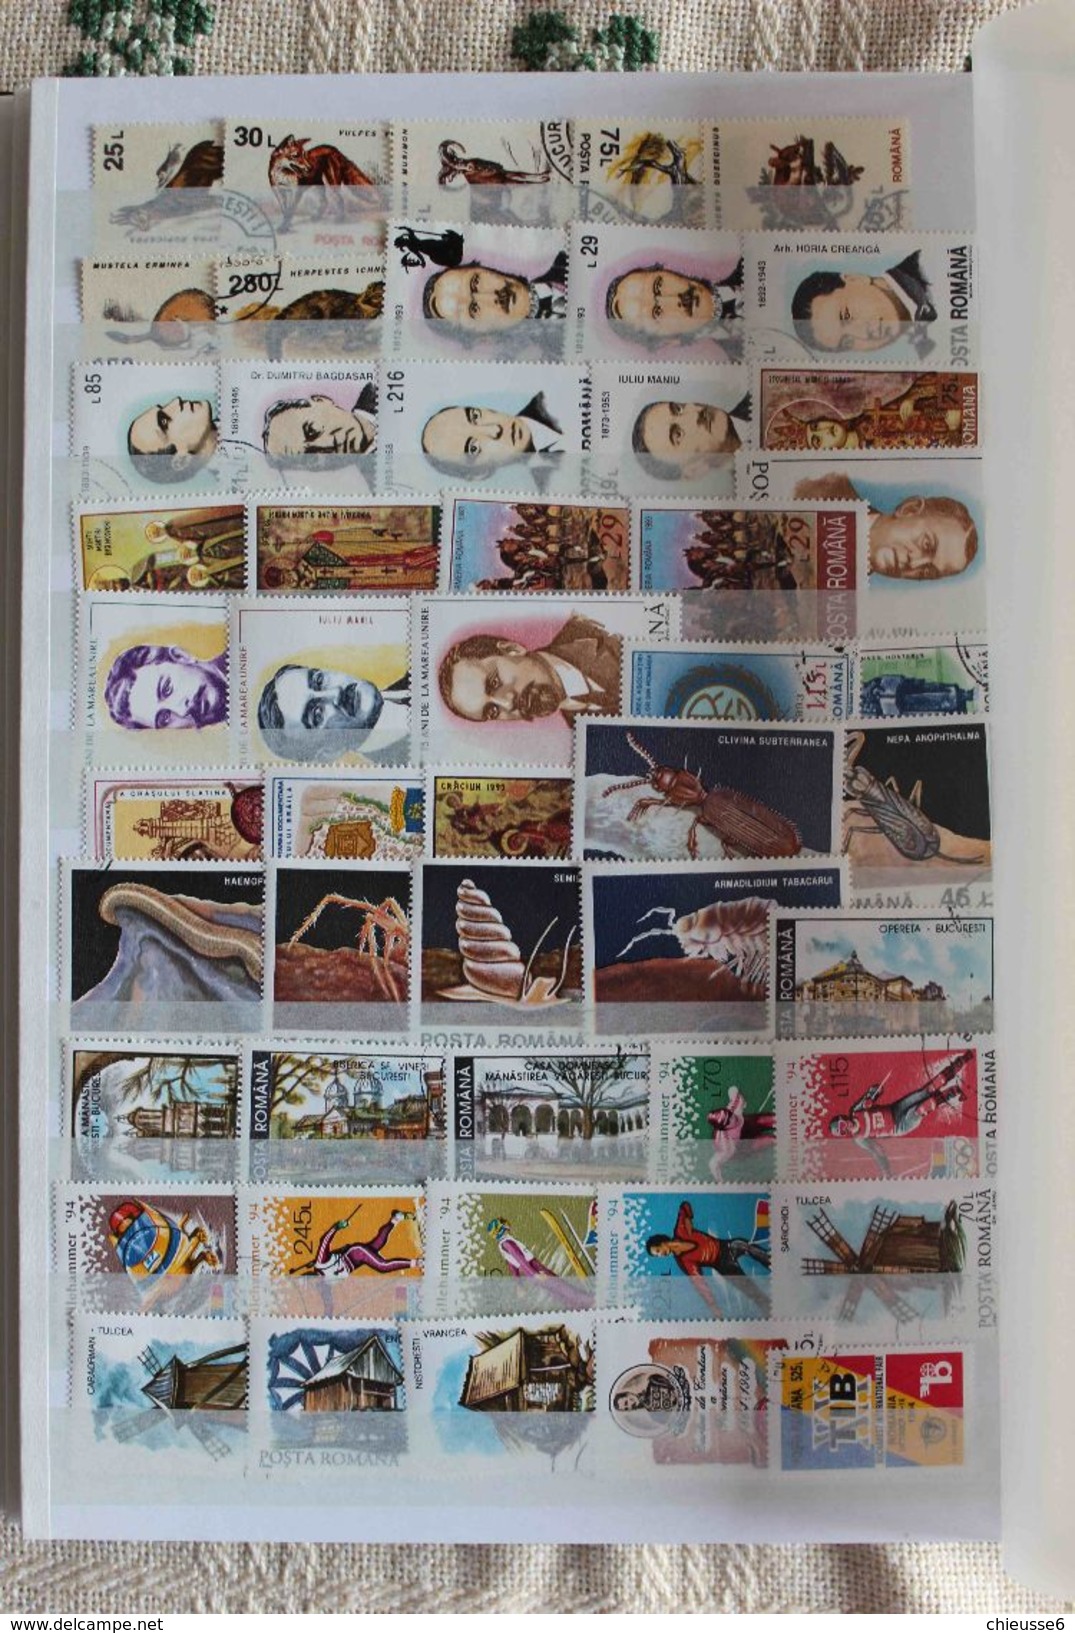 Roumanie collection  + 800 timbres dans classeur neuf